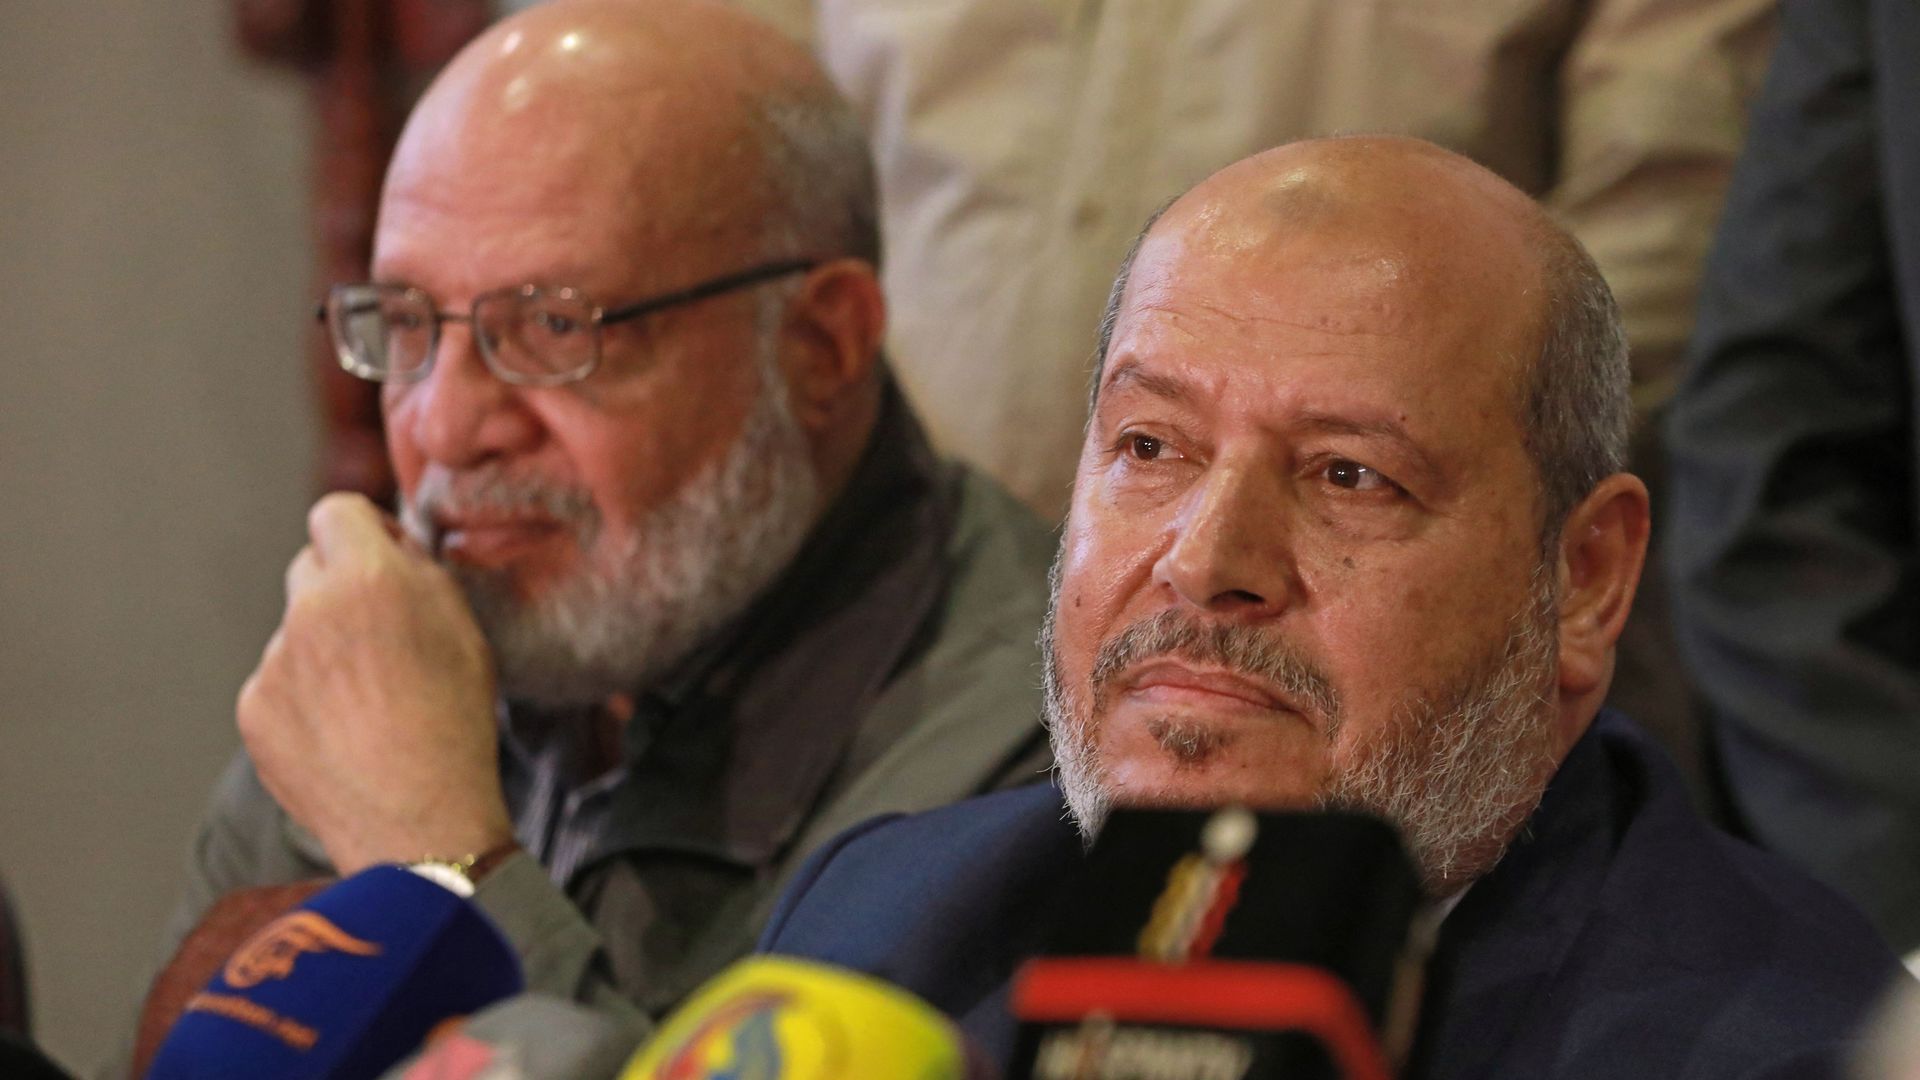 Hamas arab relations chief Khalil al-Hayya (R) and Abdulaziz al-Minawi, senior official of the Palestinian Islamic Jihad movement, hold a press conference during a visit to the Syrian capital Damascus